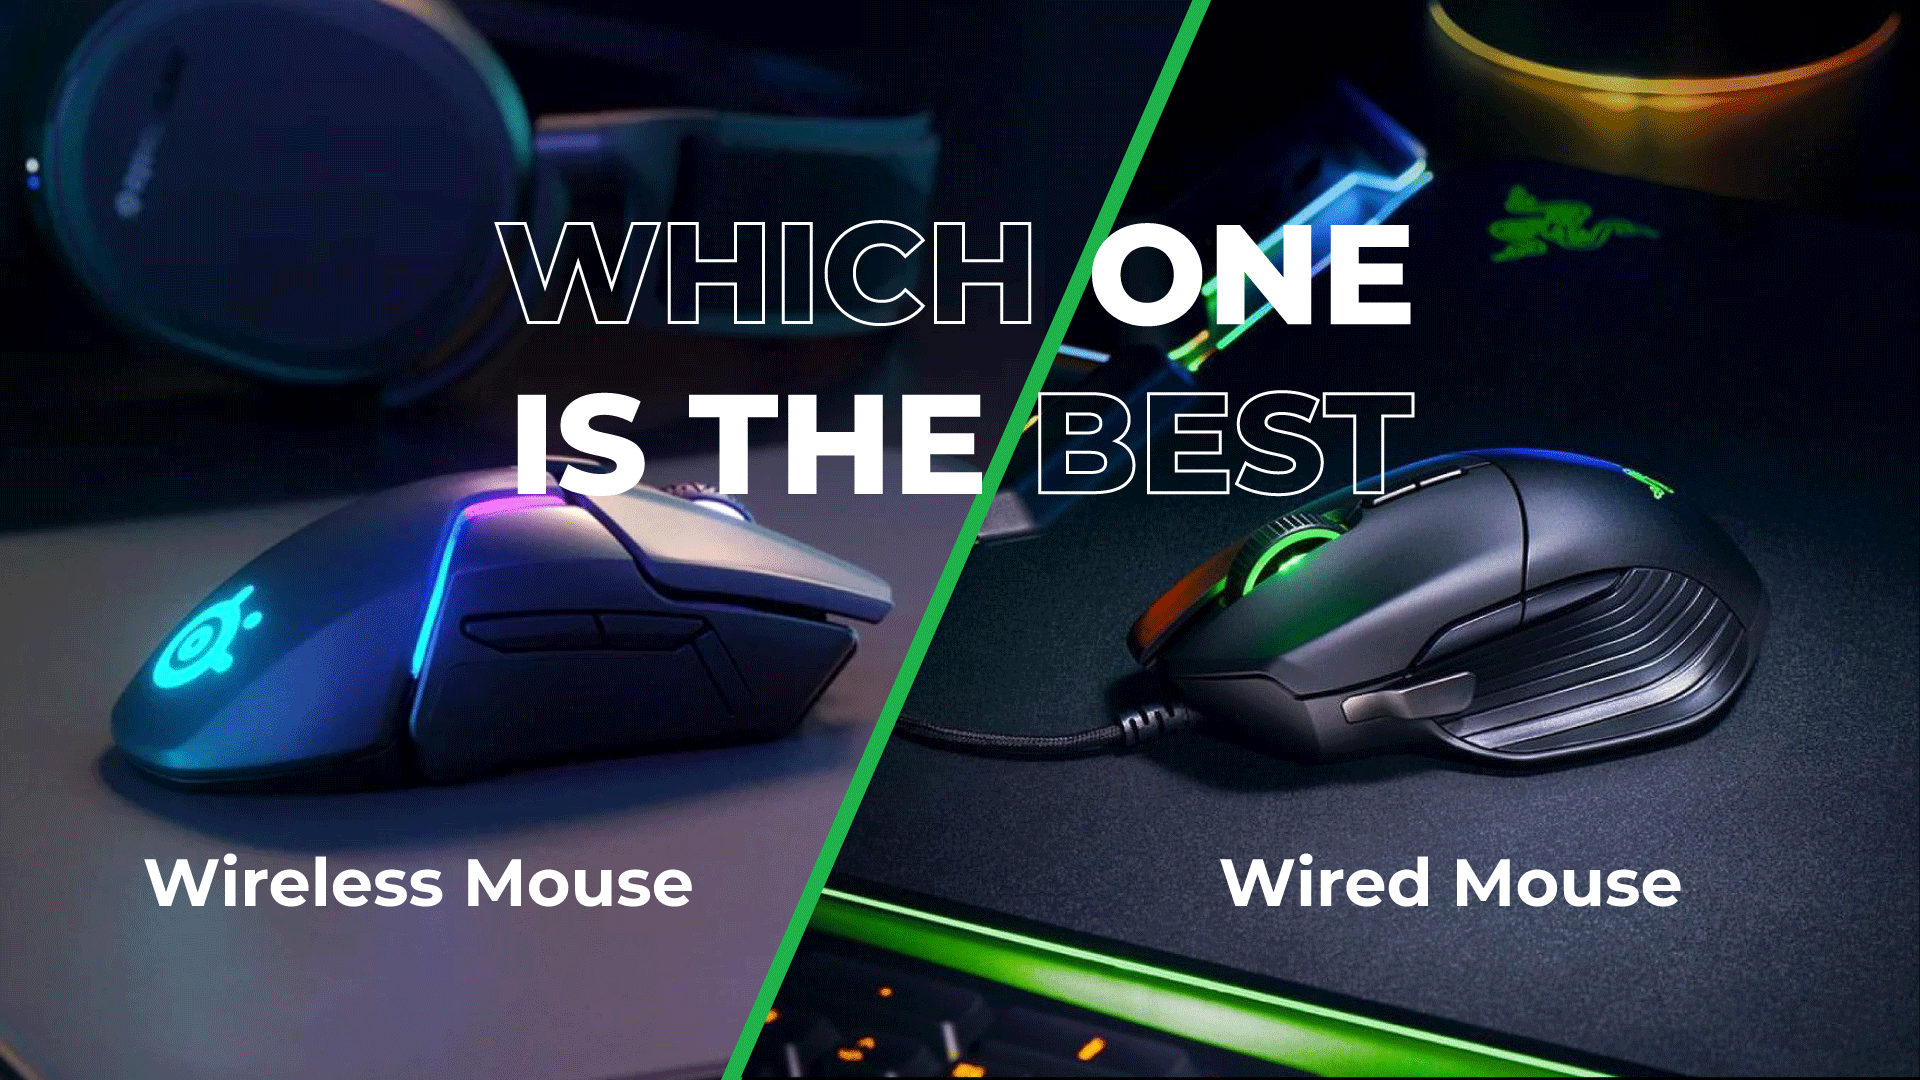 Wireless Mouse or Wired Mouse: Which one is the best?